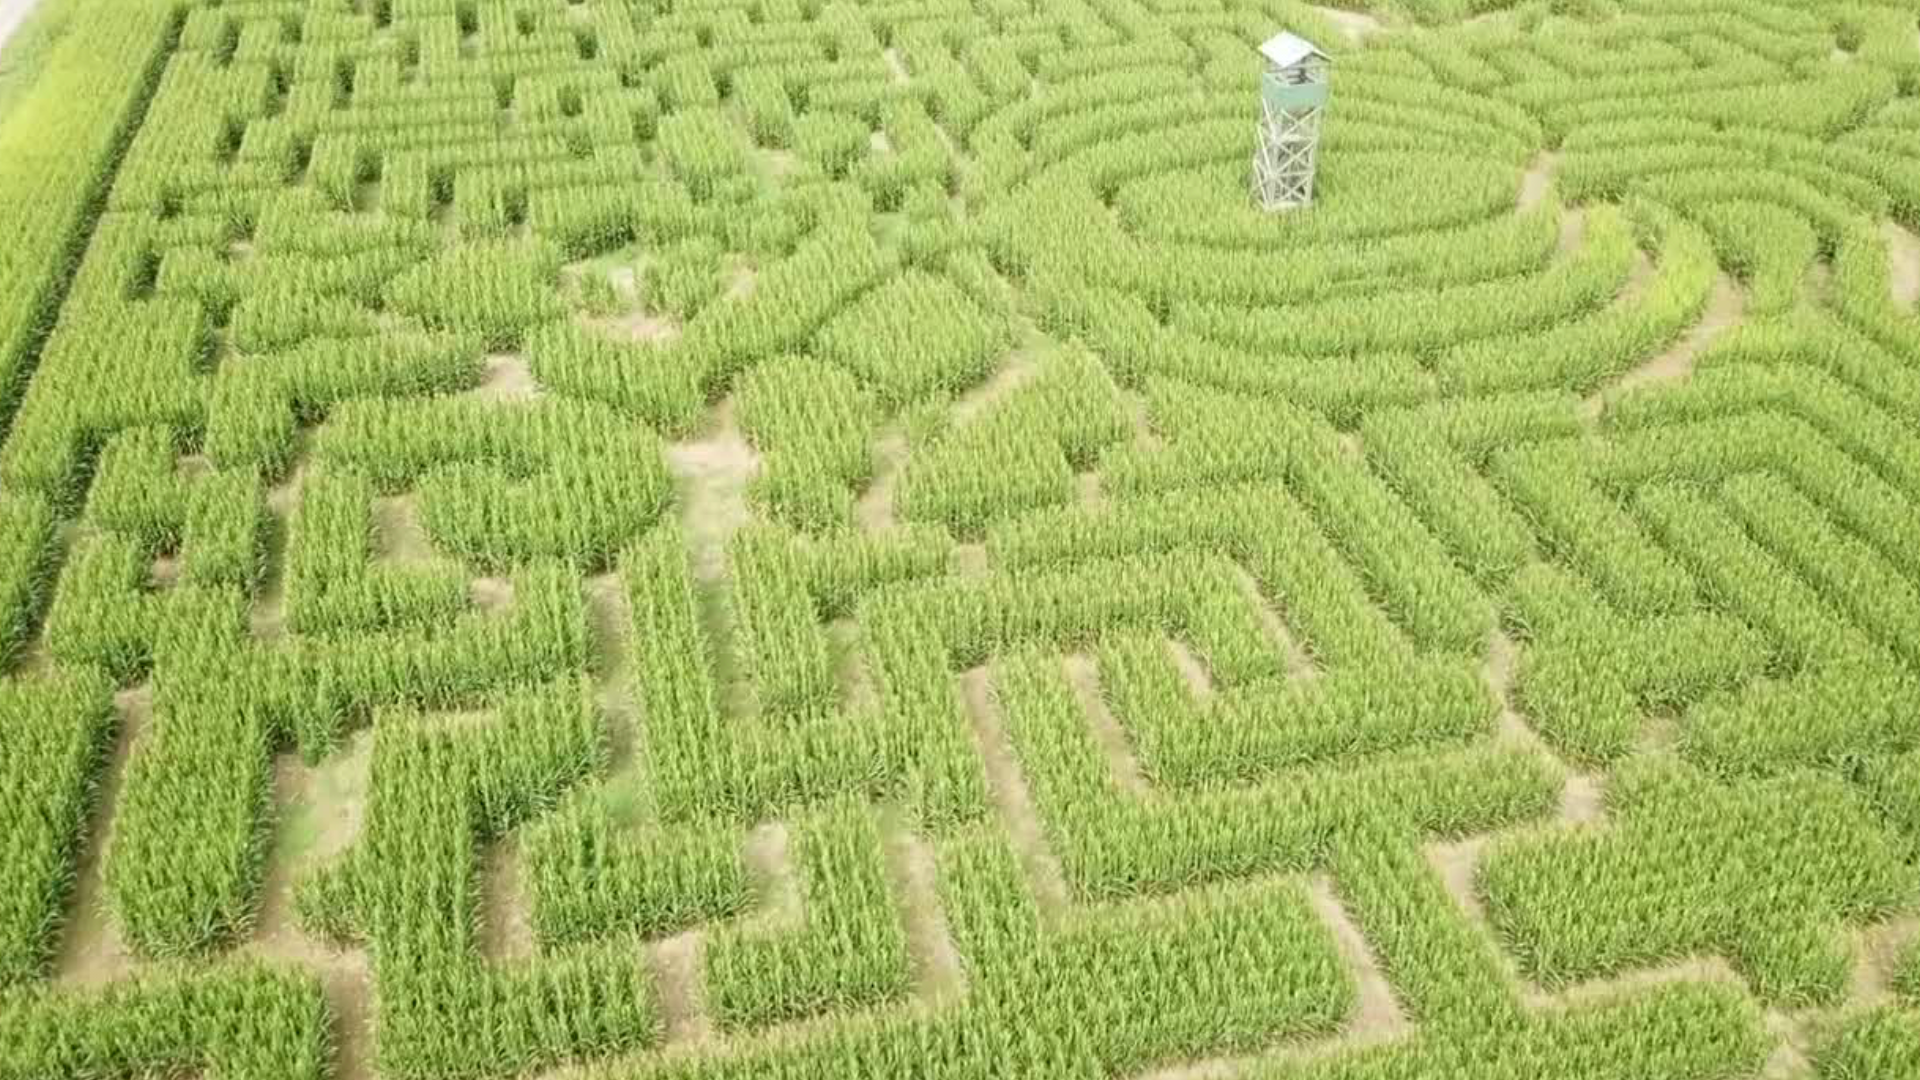 This year's corn maze theme at Mazezilla is "Spooktacular 2020."